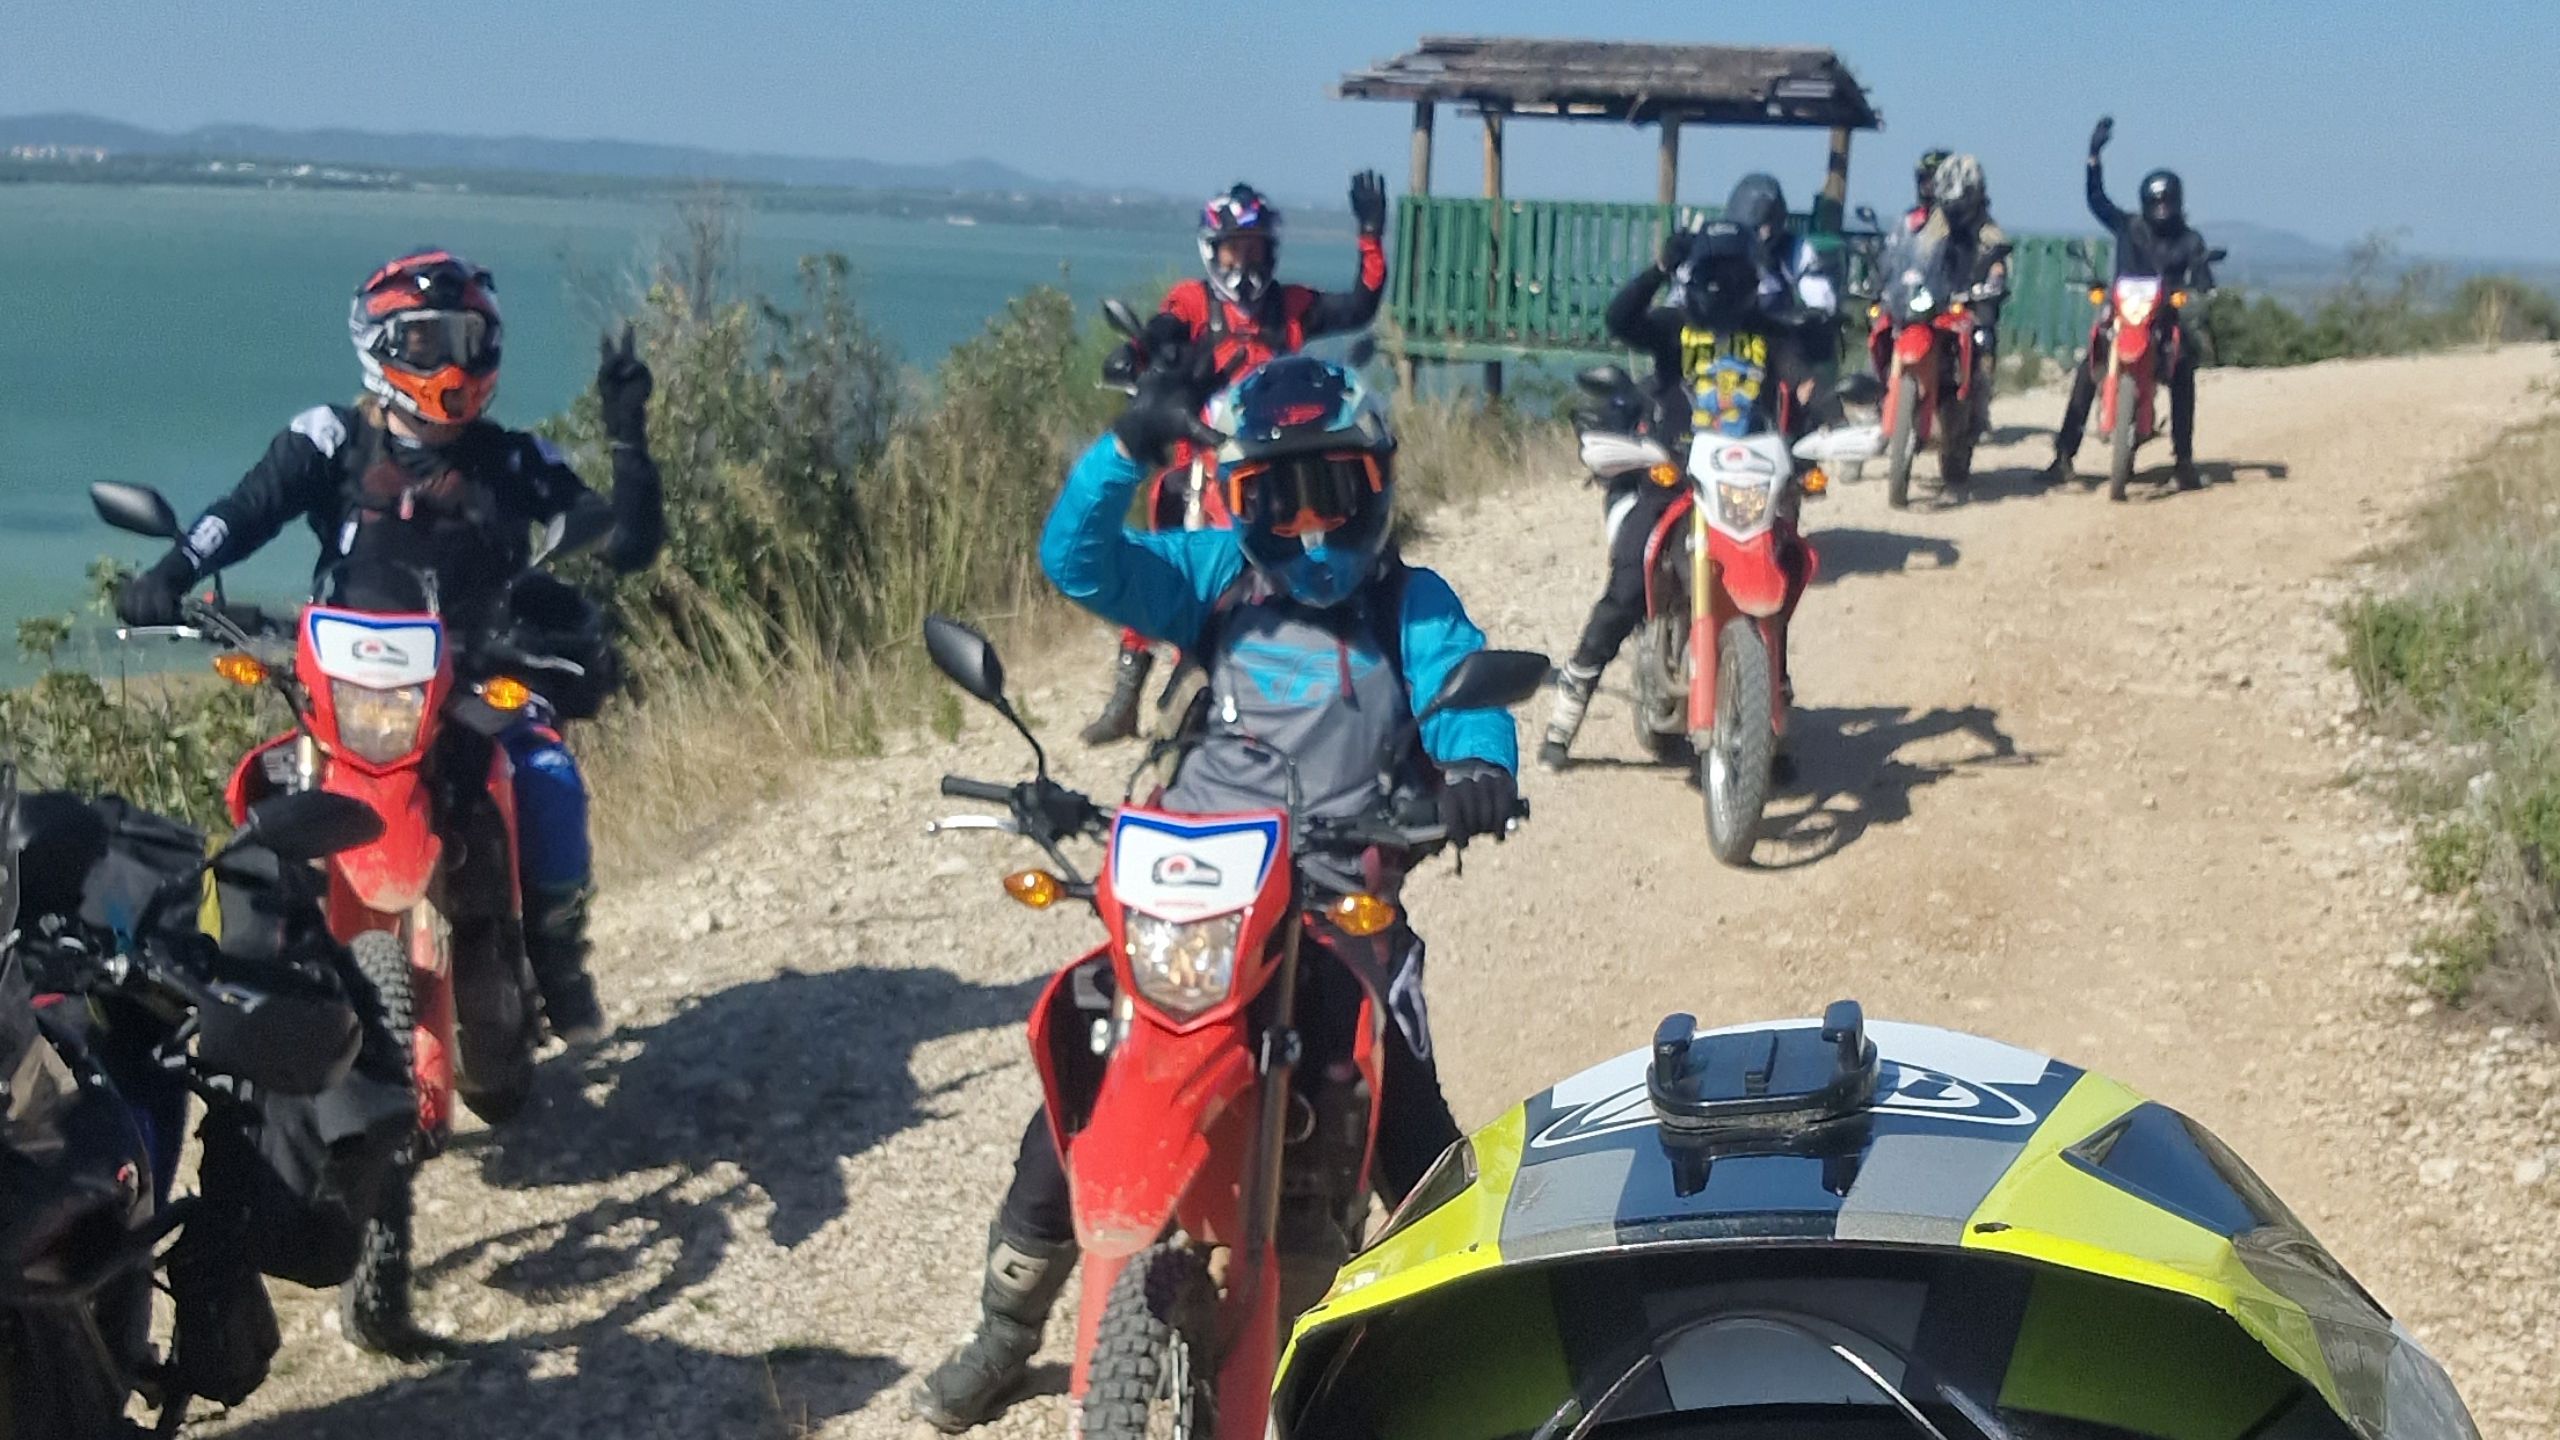 Funmoto ADVentures sightseeing 4 day only womens motorcycle tour in Croatia in the ride